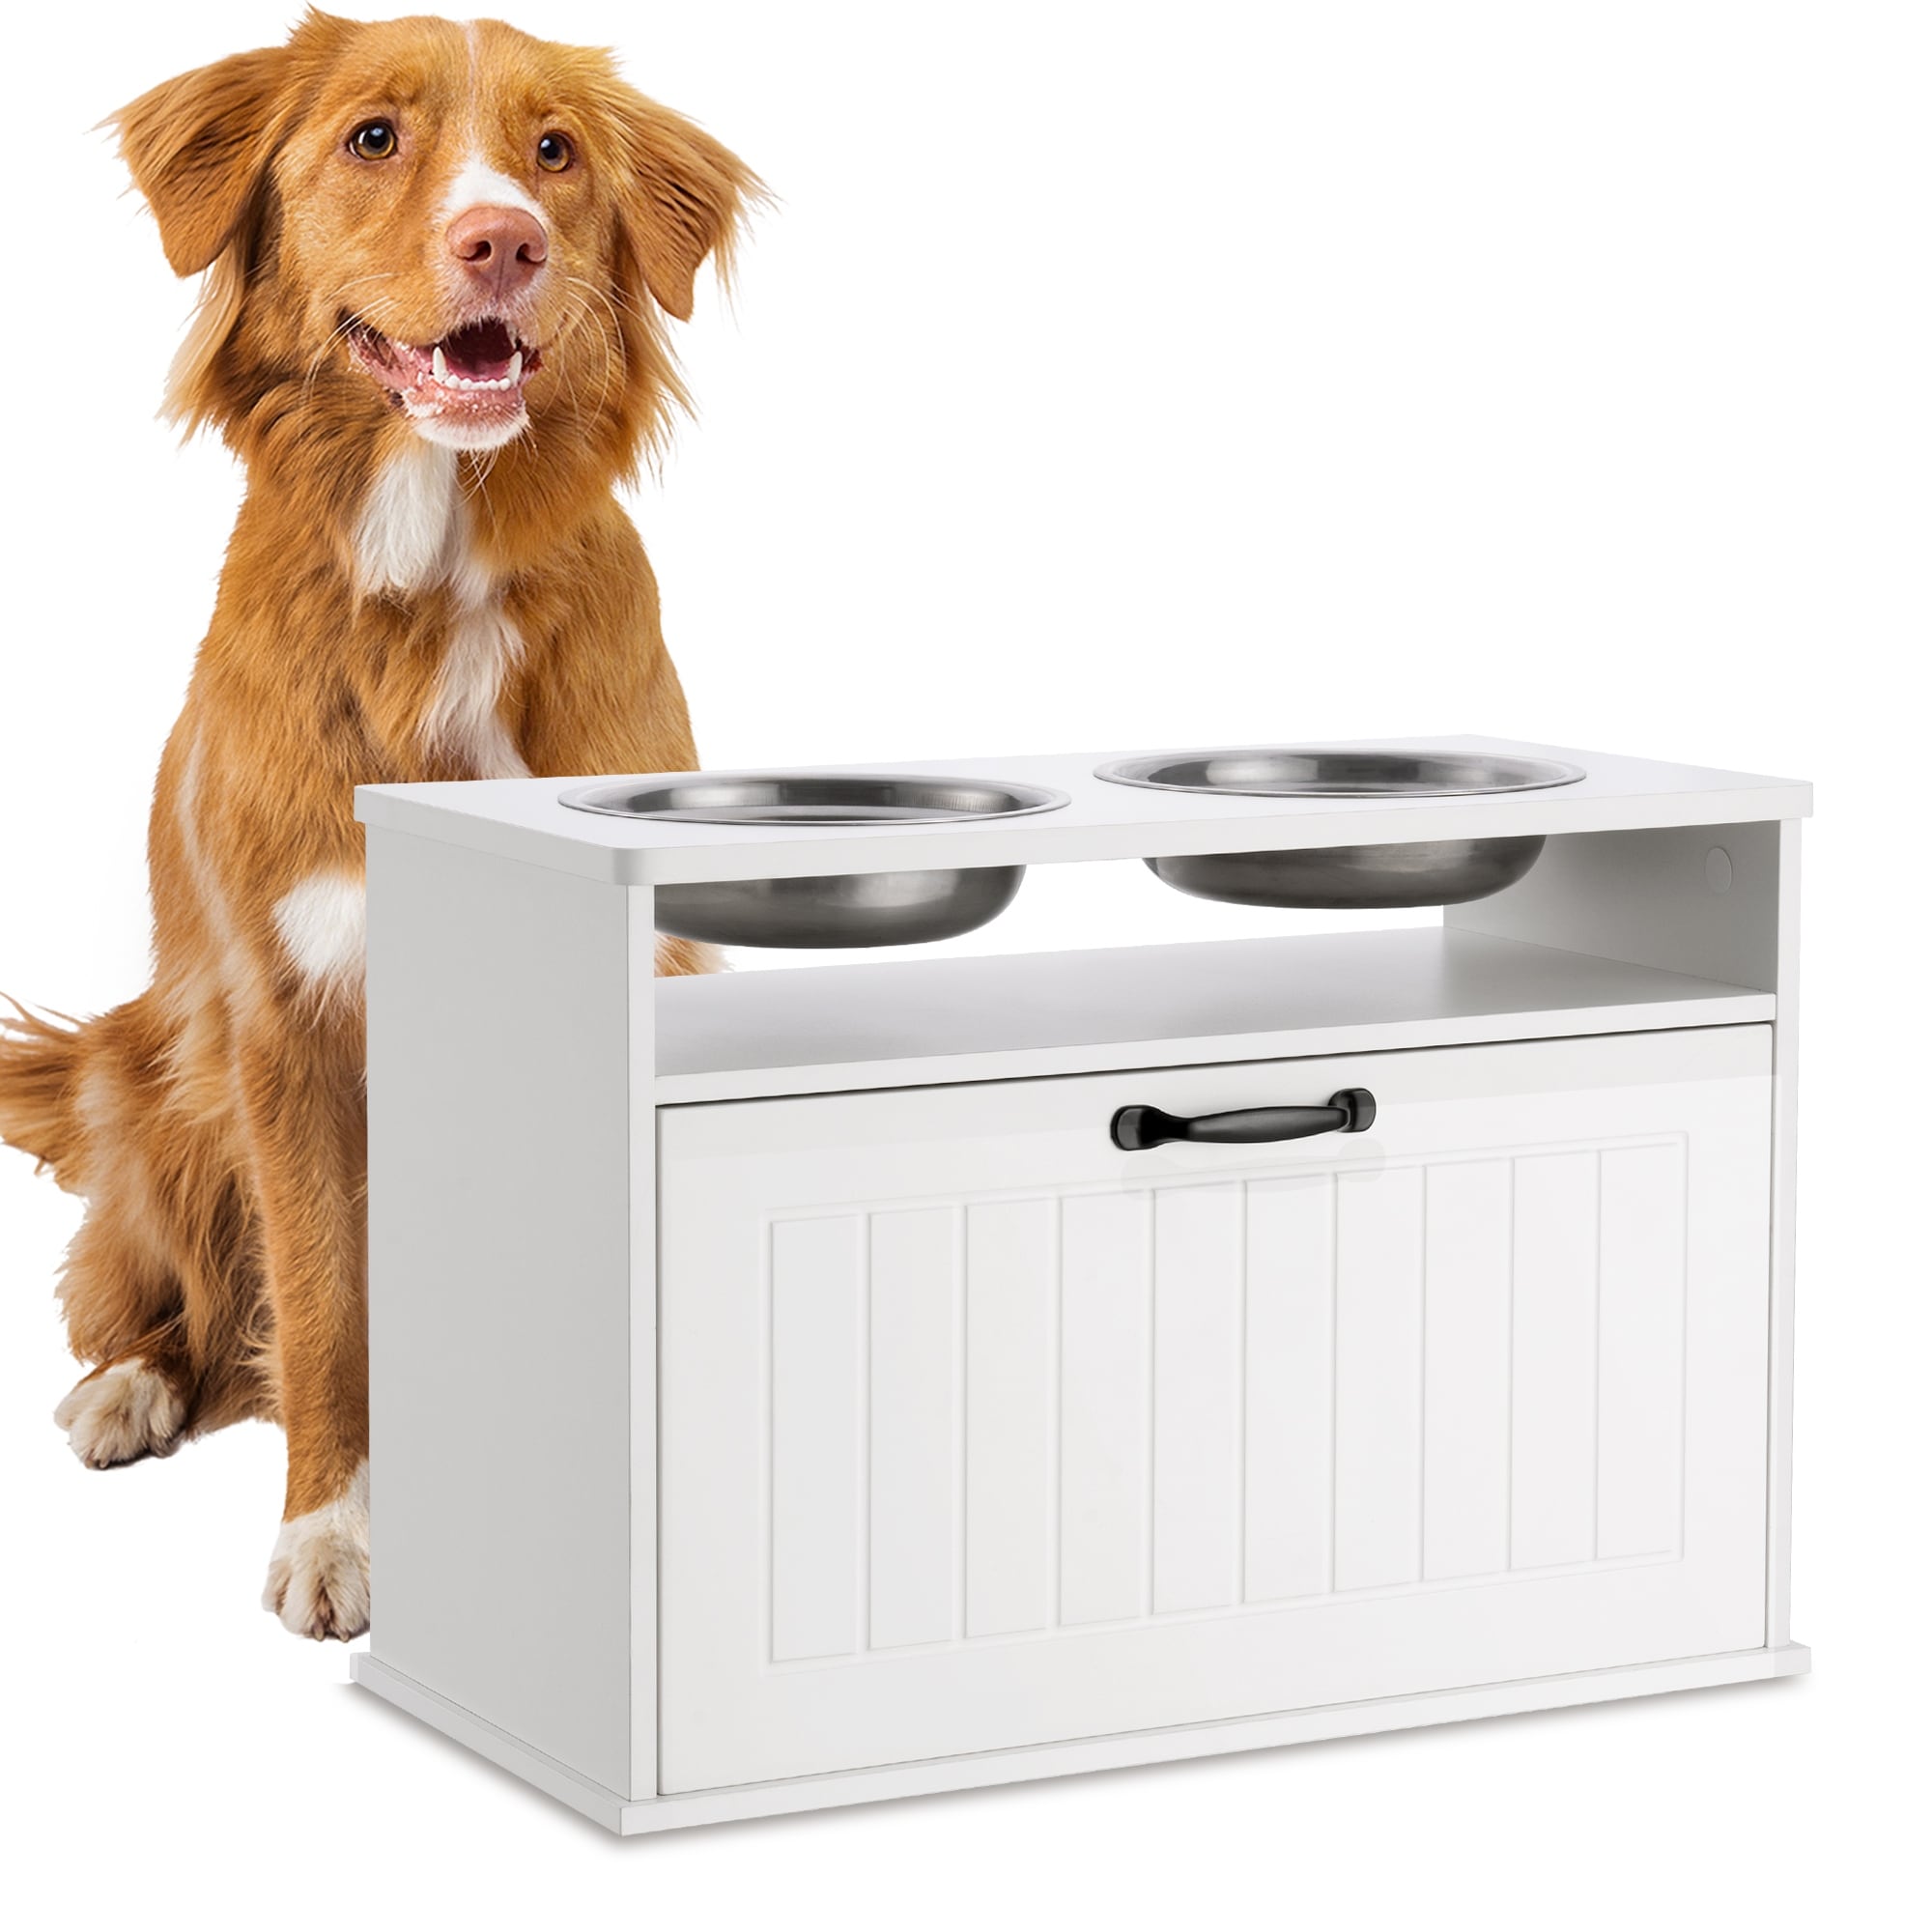 Elevated Dog Feeding Station with Storage with 2 Stainless Steel